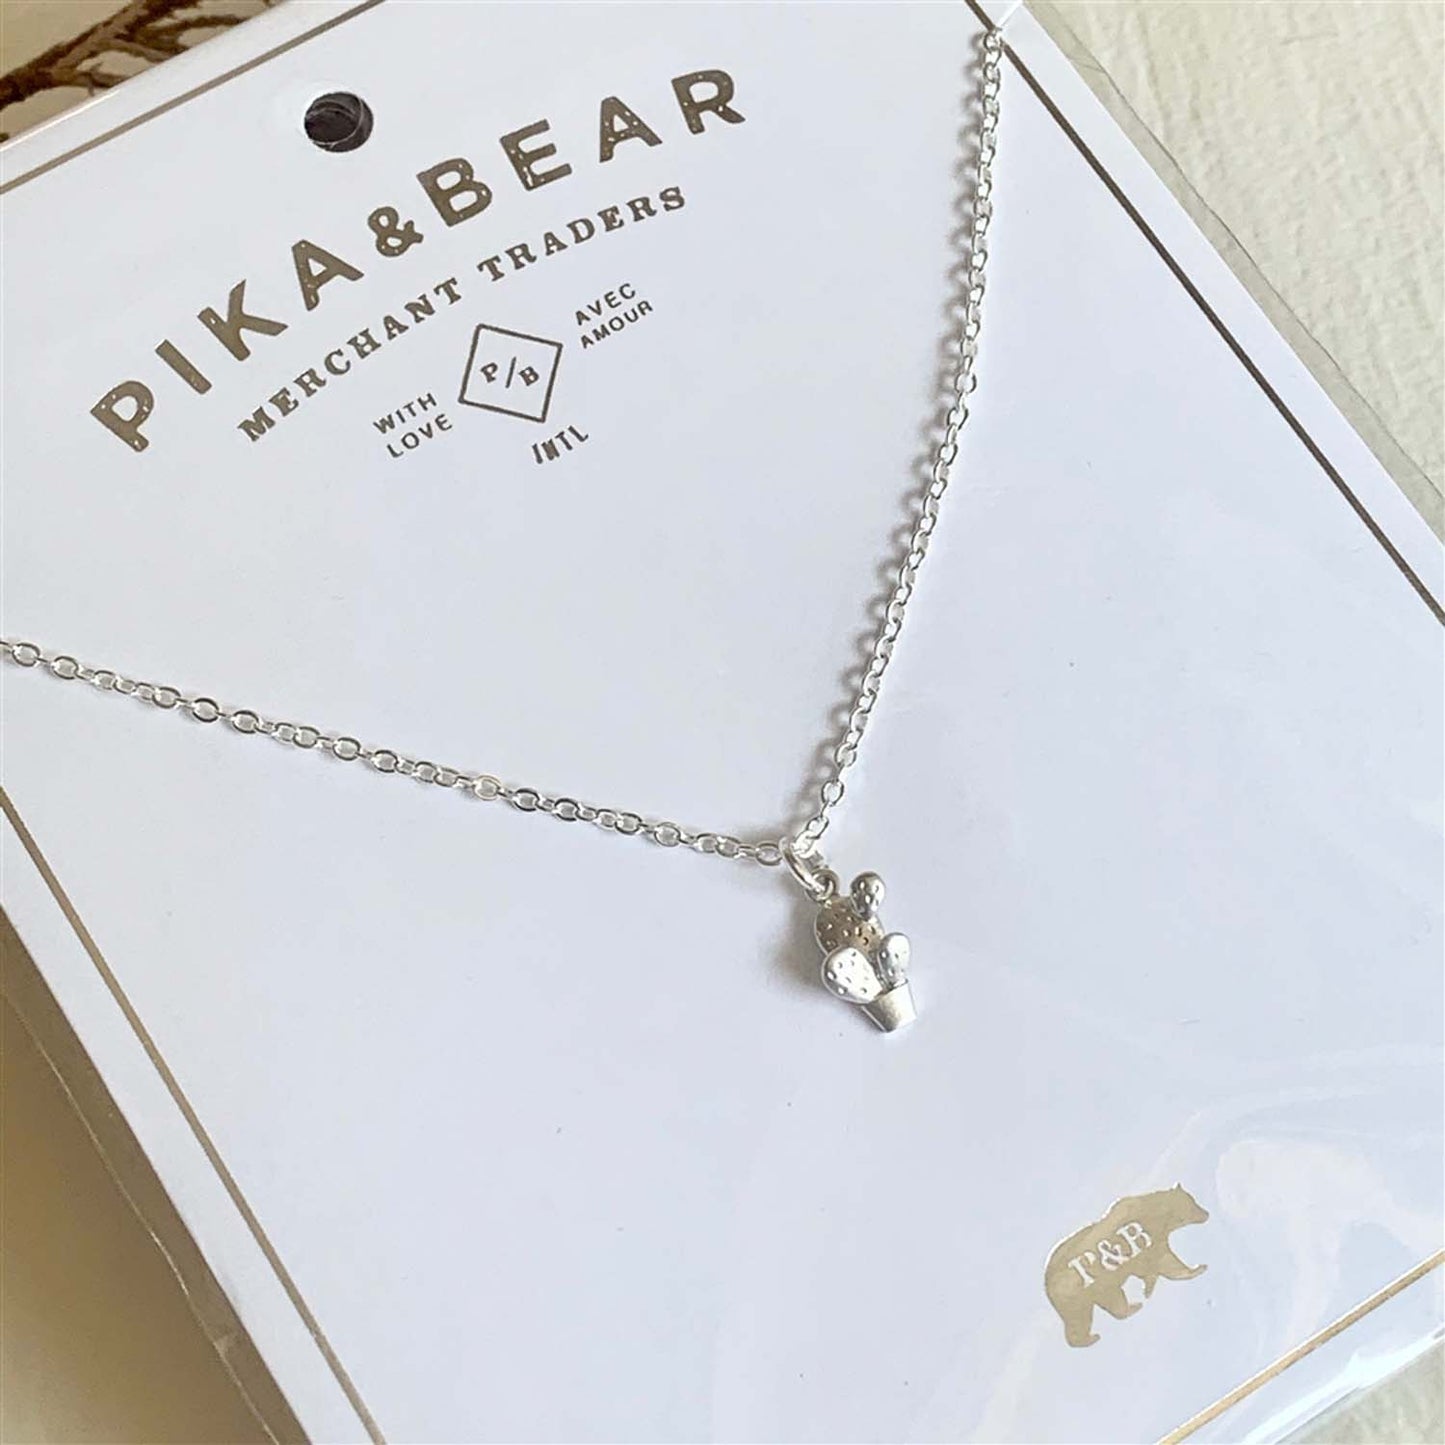 Pika & Bear "Ouch" Potted Cactus Charm Necklace